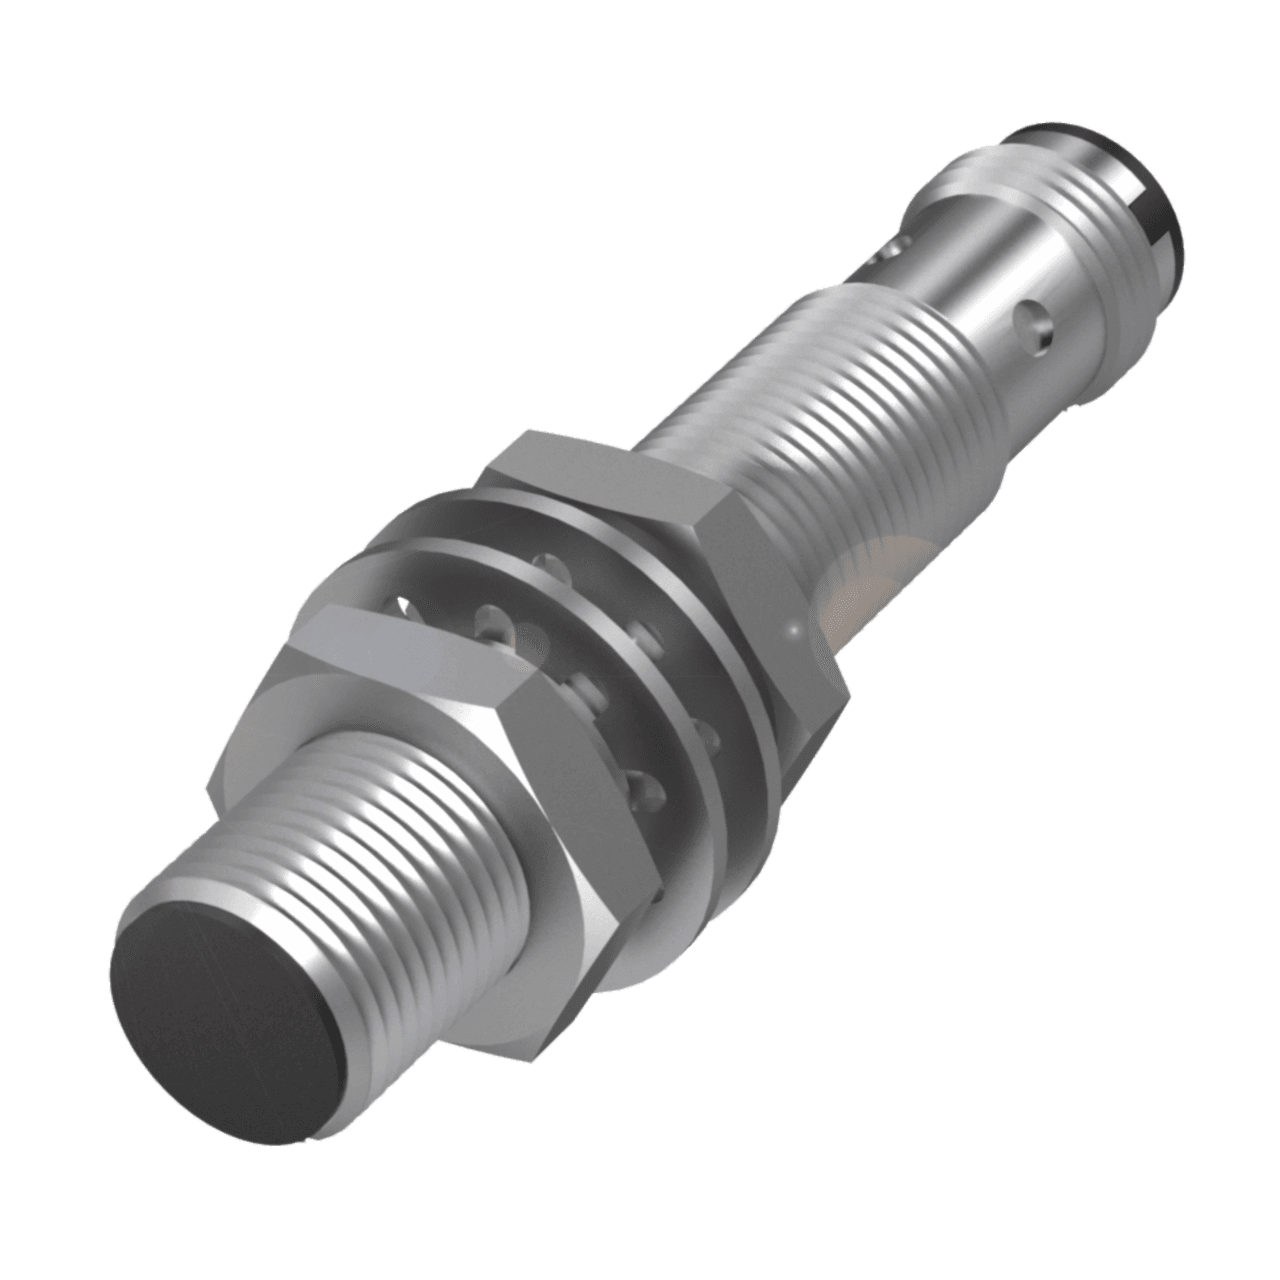 Balluff BES0060 Inductive standard sensors with preferred type, Dimension: Ø 12 x 65 mm, Style: M12x1, Installation: for flush mounting, Range: 2 mm, Switching output: PNP Normally open (NO), Switching frequency: 3500 Hz, Housing material: Brass, Nickel-free coated